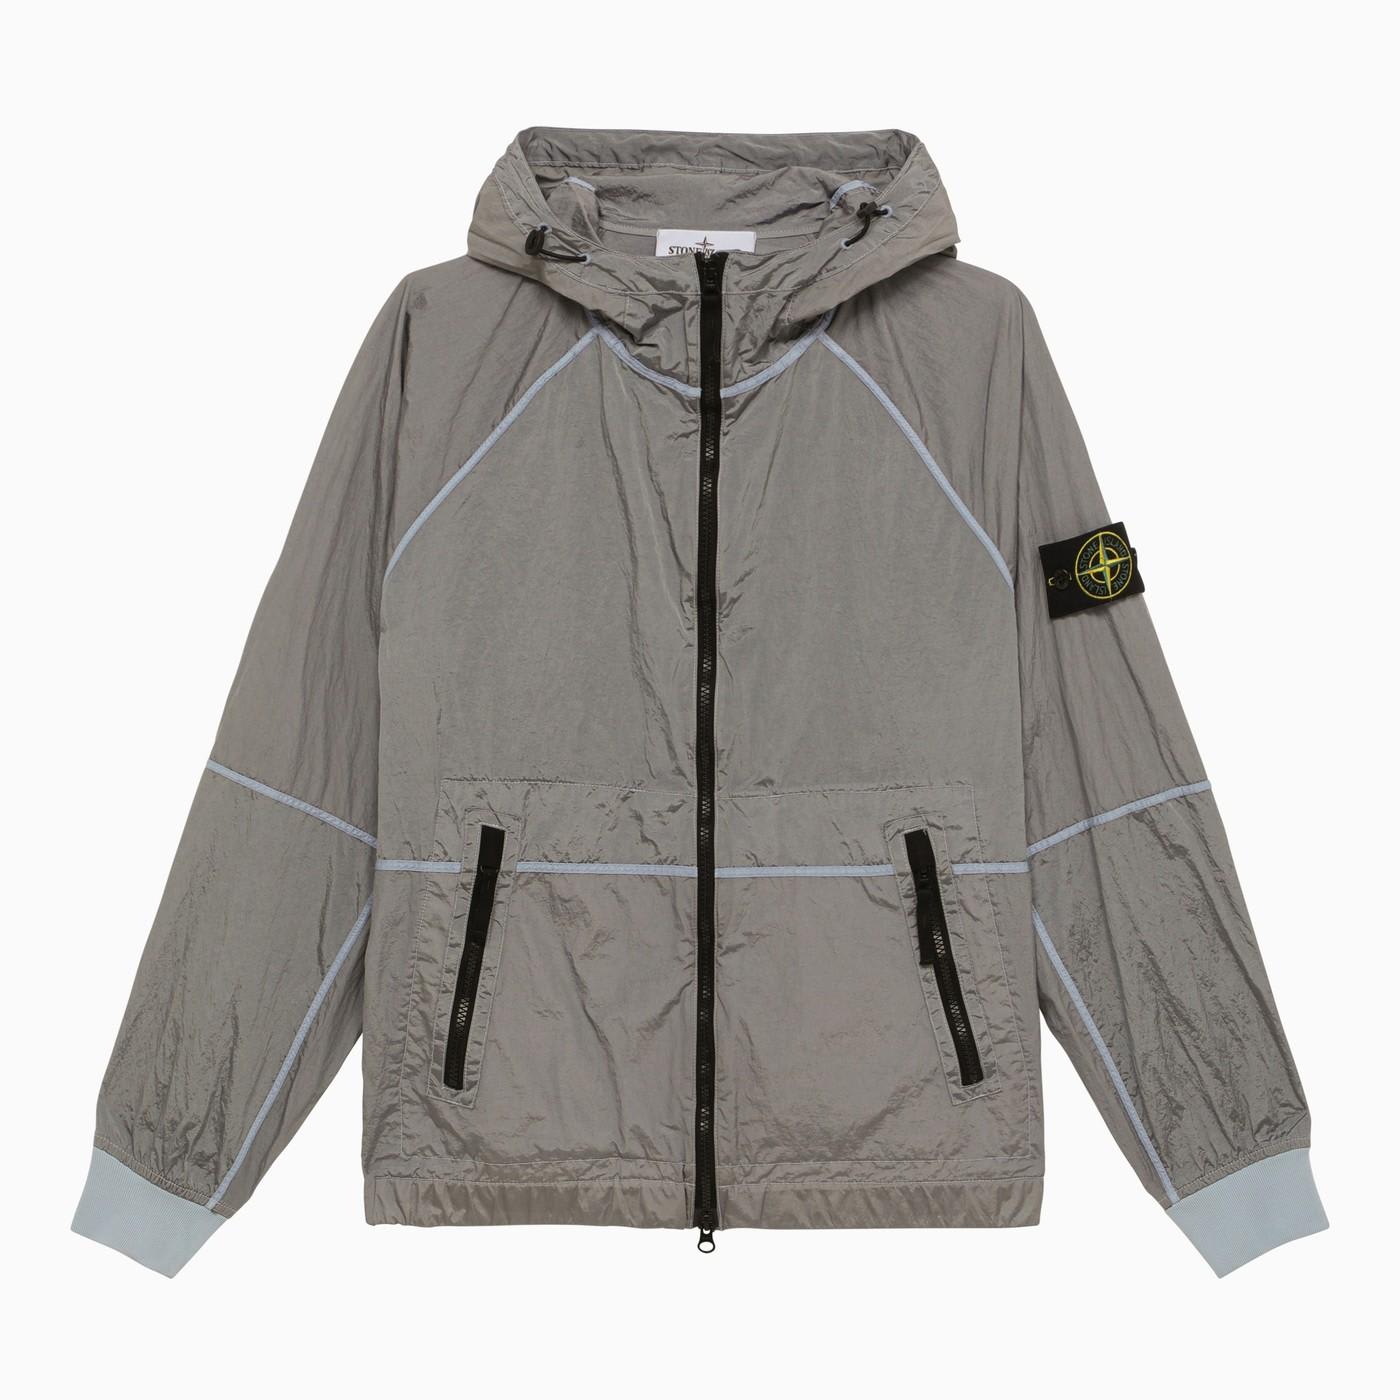 STONE ISLAND PACKABLE LIGHT BLUE JACKET WITH LOGO